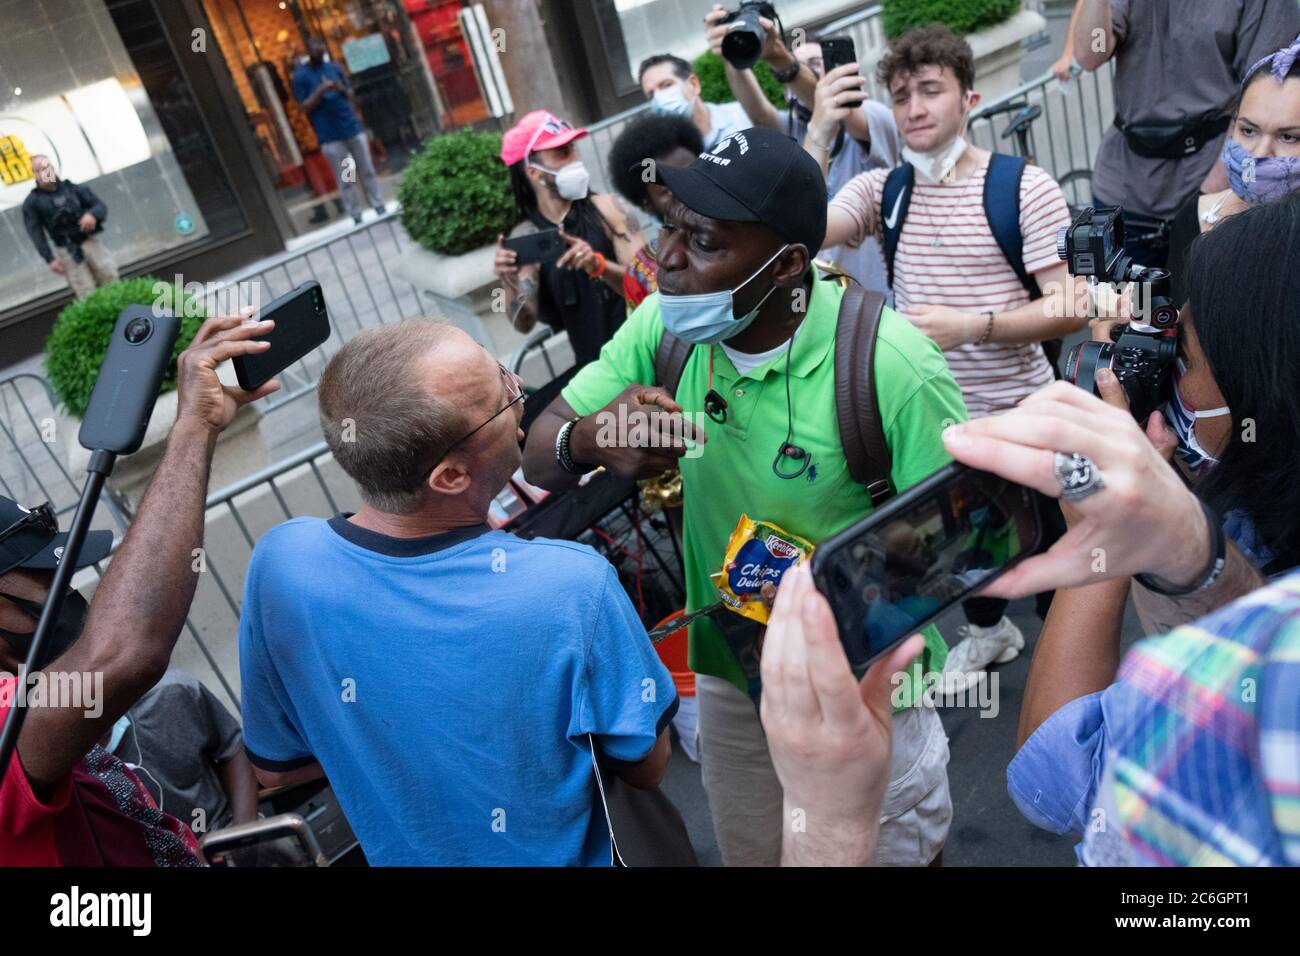 New York, United States. 08th July, 2020. An altercation between a Trump supporter and a BLM protester in front of Trump Tower in Manhattan where a large Black Lives Matter mural was painted.As New York City enters phase 3 of reopening retail stores for indoor shopping, restaurants have been postponed for indoor dinning. Meanwhile Black Lives Matter protests continue in the city as the Mayor along with a group of people painted a large Black Lives Matter mural in front of Trump Tower on 5th Ave. Credit: SOPA Images Limited/Alamy Live News Stock Photo